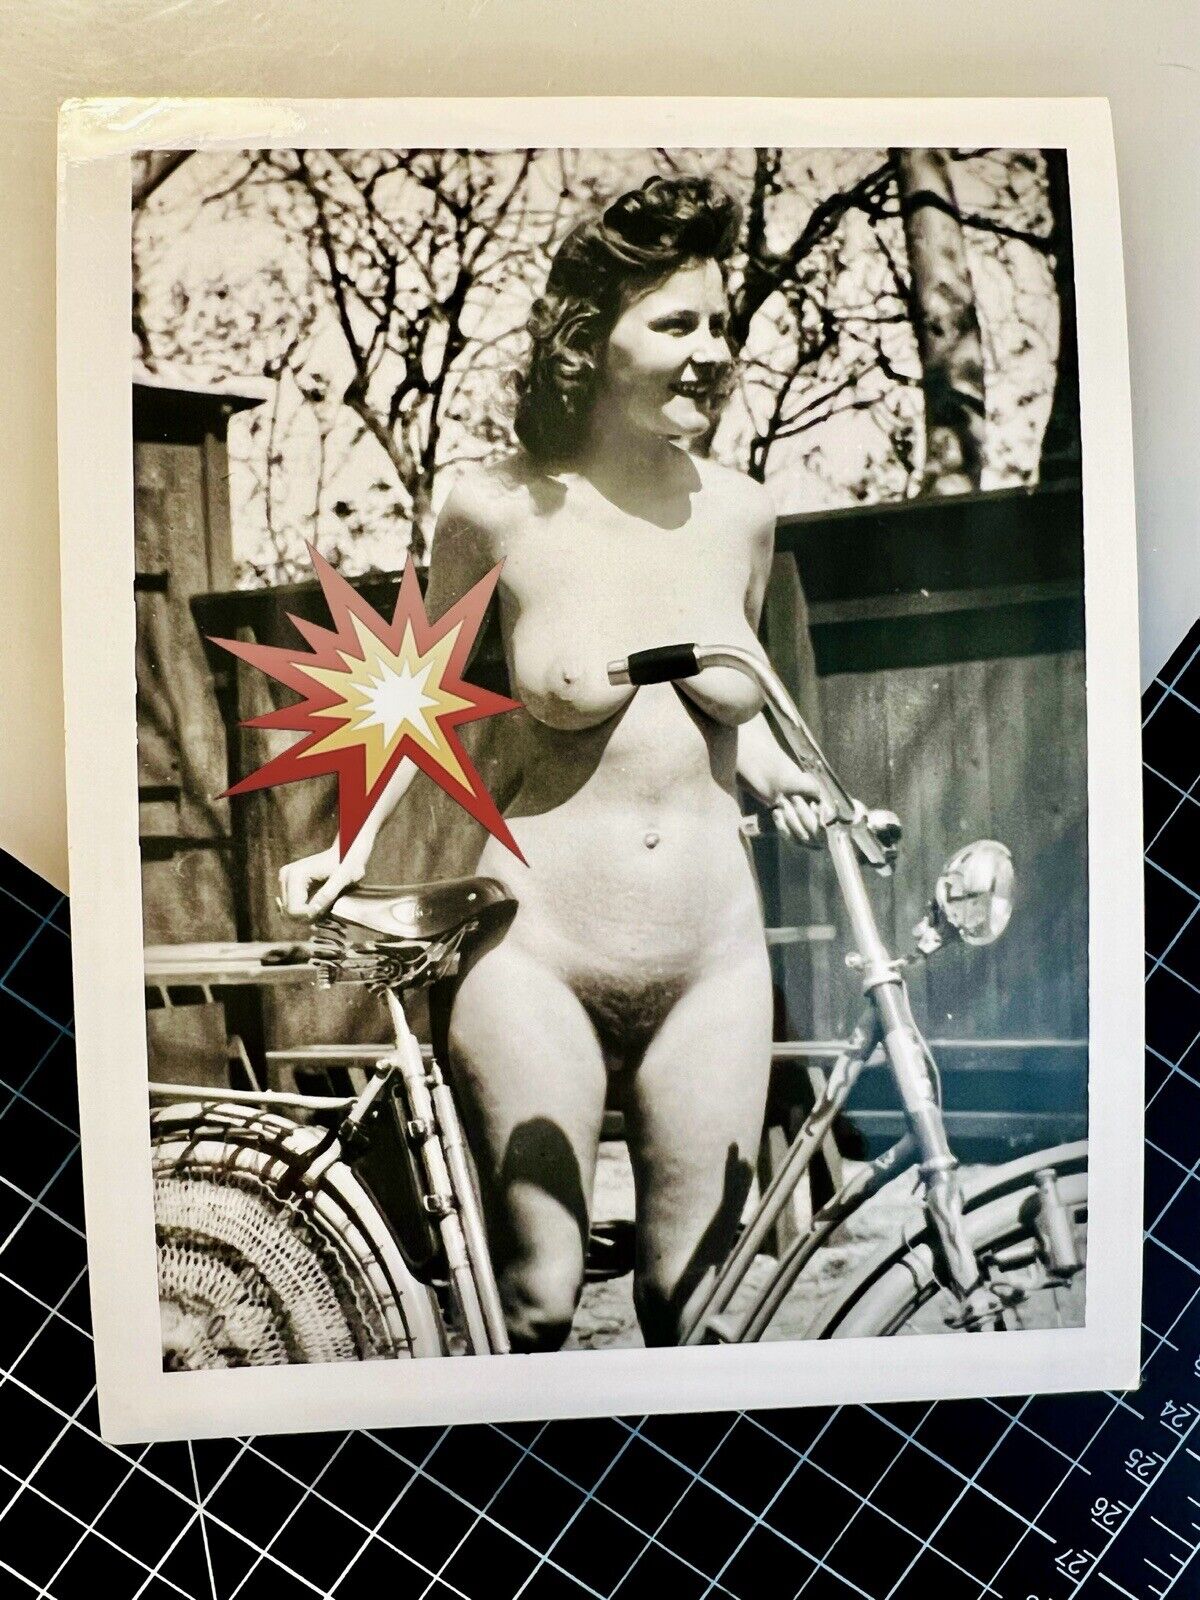 Vintage 50’s Girl Bicycle Bosom PIN UP Risque Nude Original B&W Girlie Photo #86